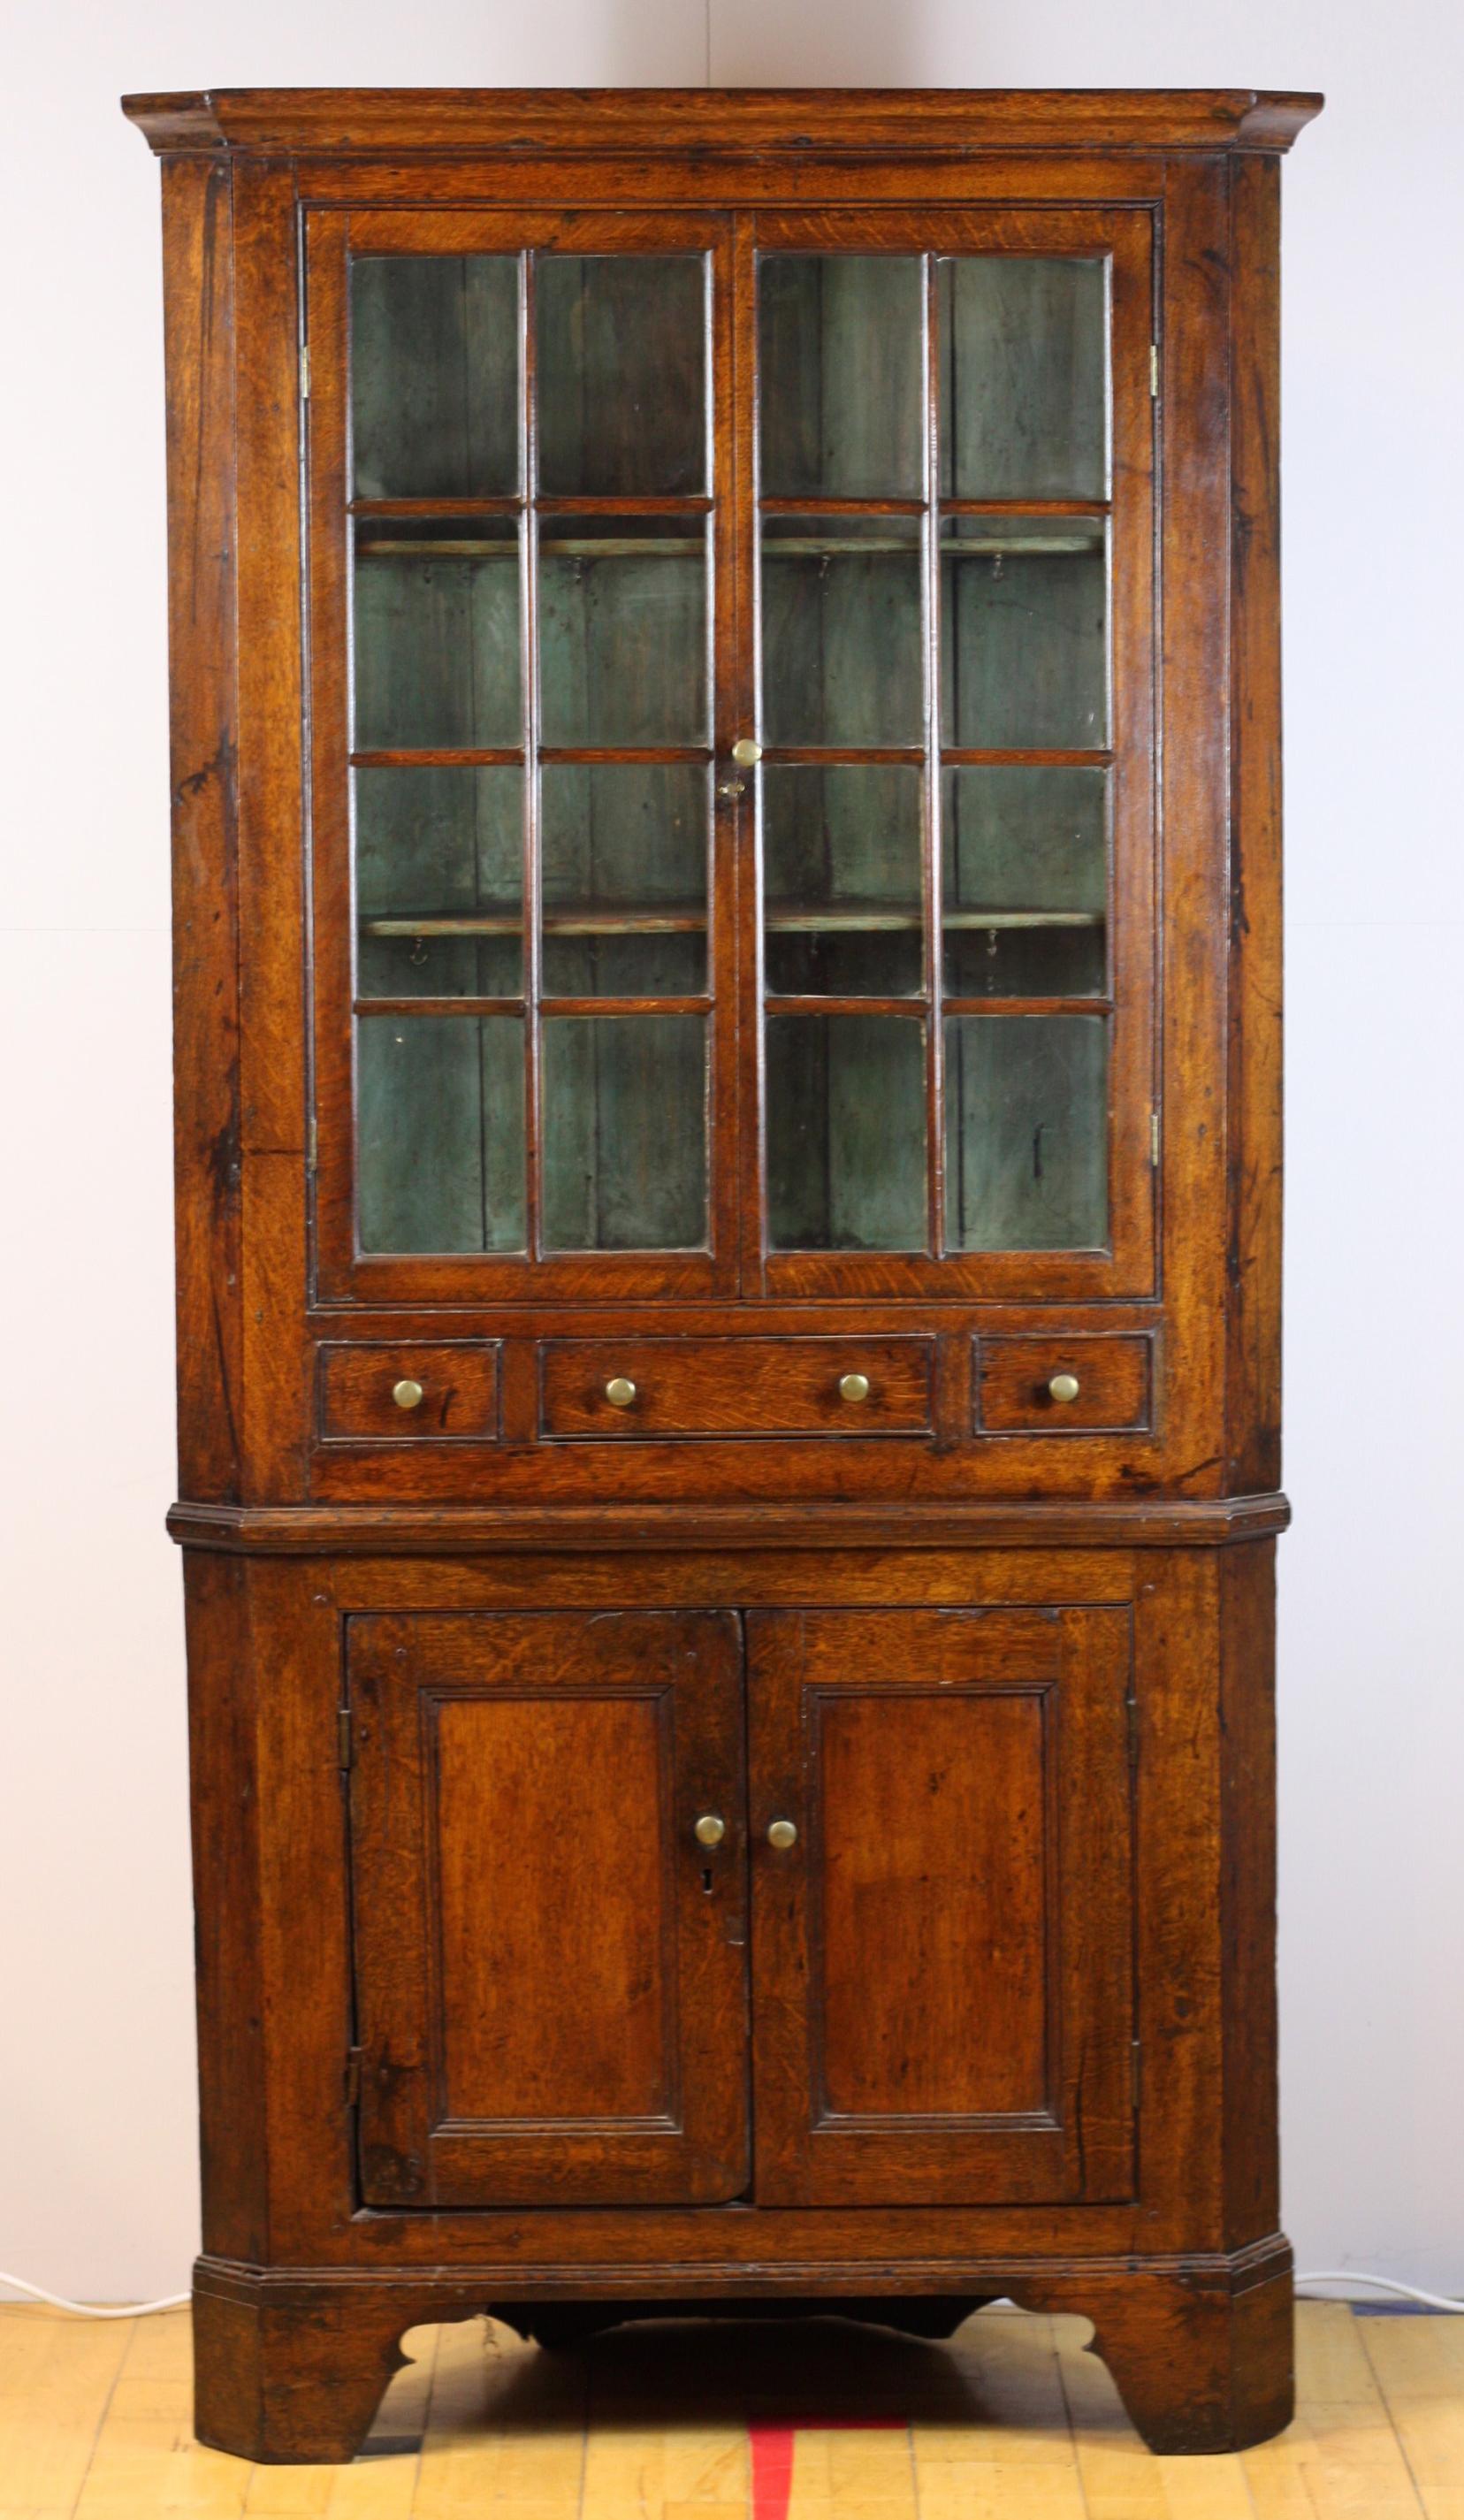 Fine Welsh two section half glazed corner cupboard from Pembrokeshire, circa 1790 with exceptional patterning to the grain. In fantastic original condition, with wonderful deep rich color and excellent patina. The top half has 2 glazed doors opening